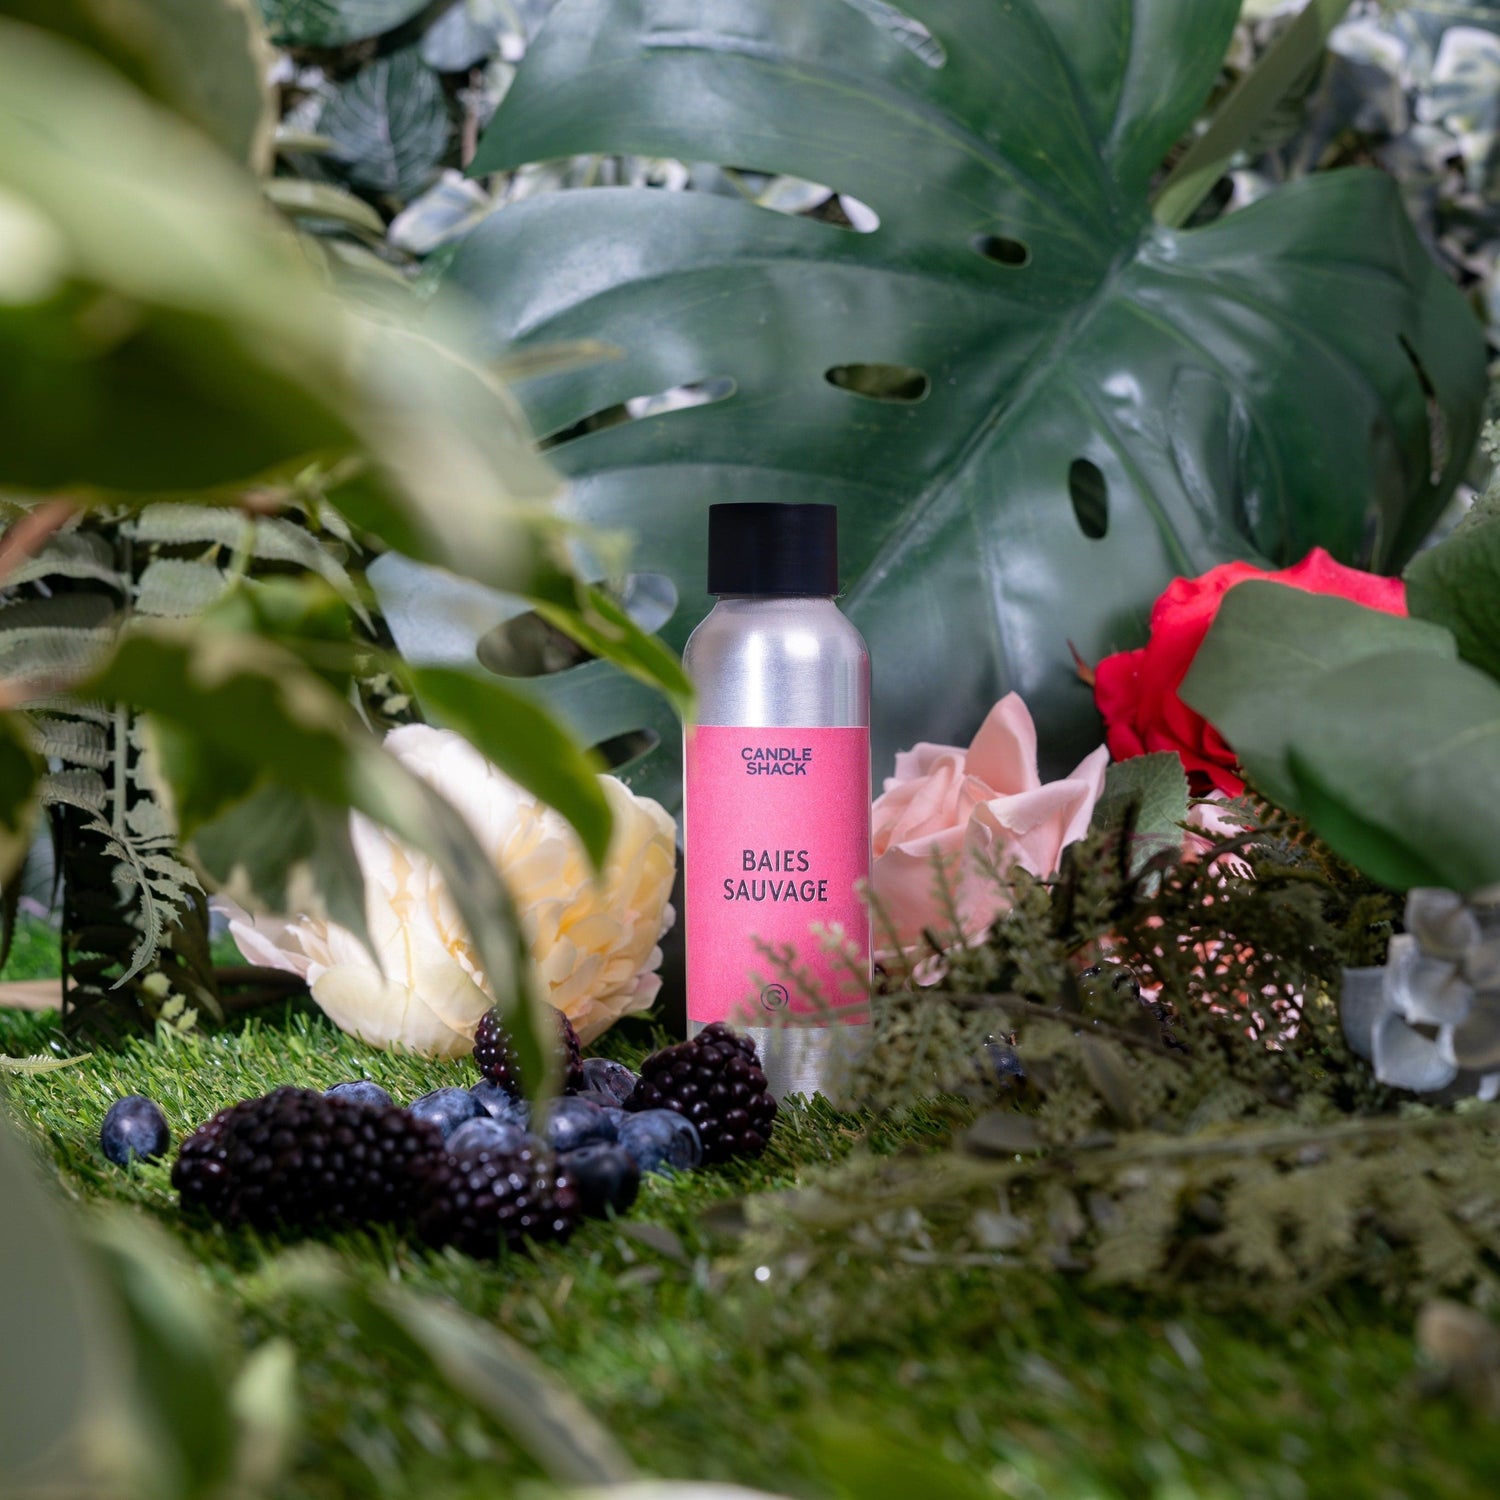 Baies Sauvage fragrance promotional photo. Fragrance, floral, diffuser